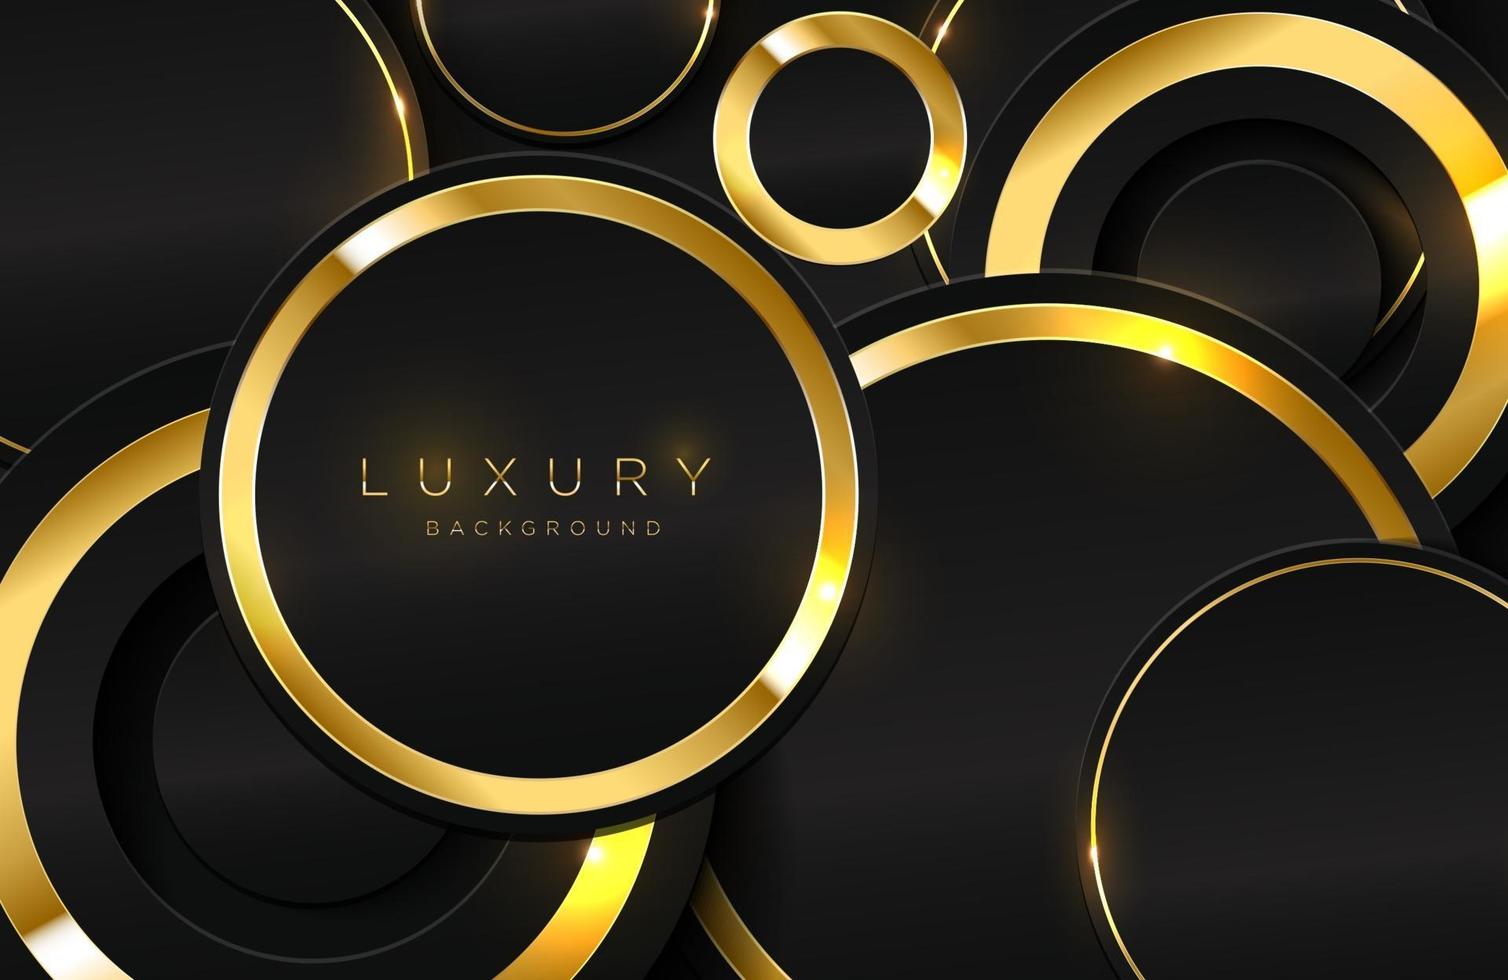 Realistic 3d background with shiny gold circle shape Vector golden circle shape on black surface Graphic design element